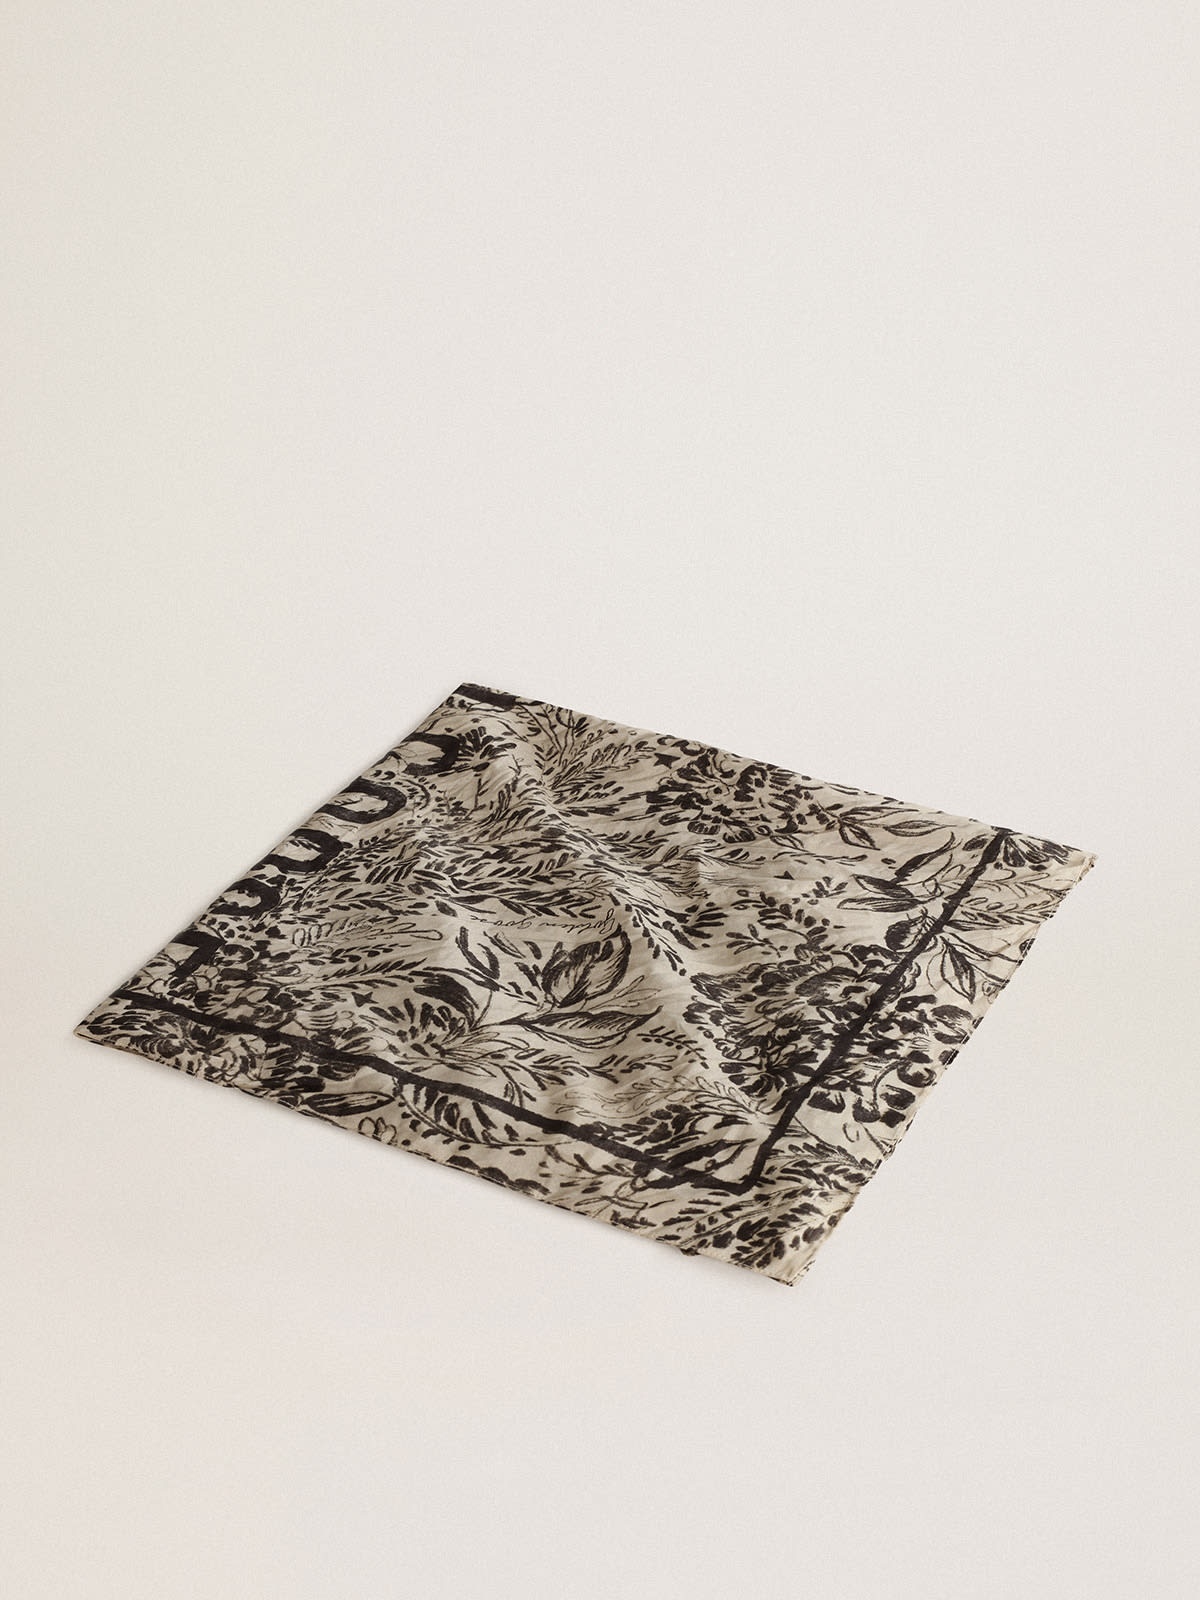 Bone-white scarf with contrasting toile de jouy pattern - 1